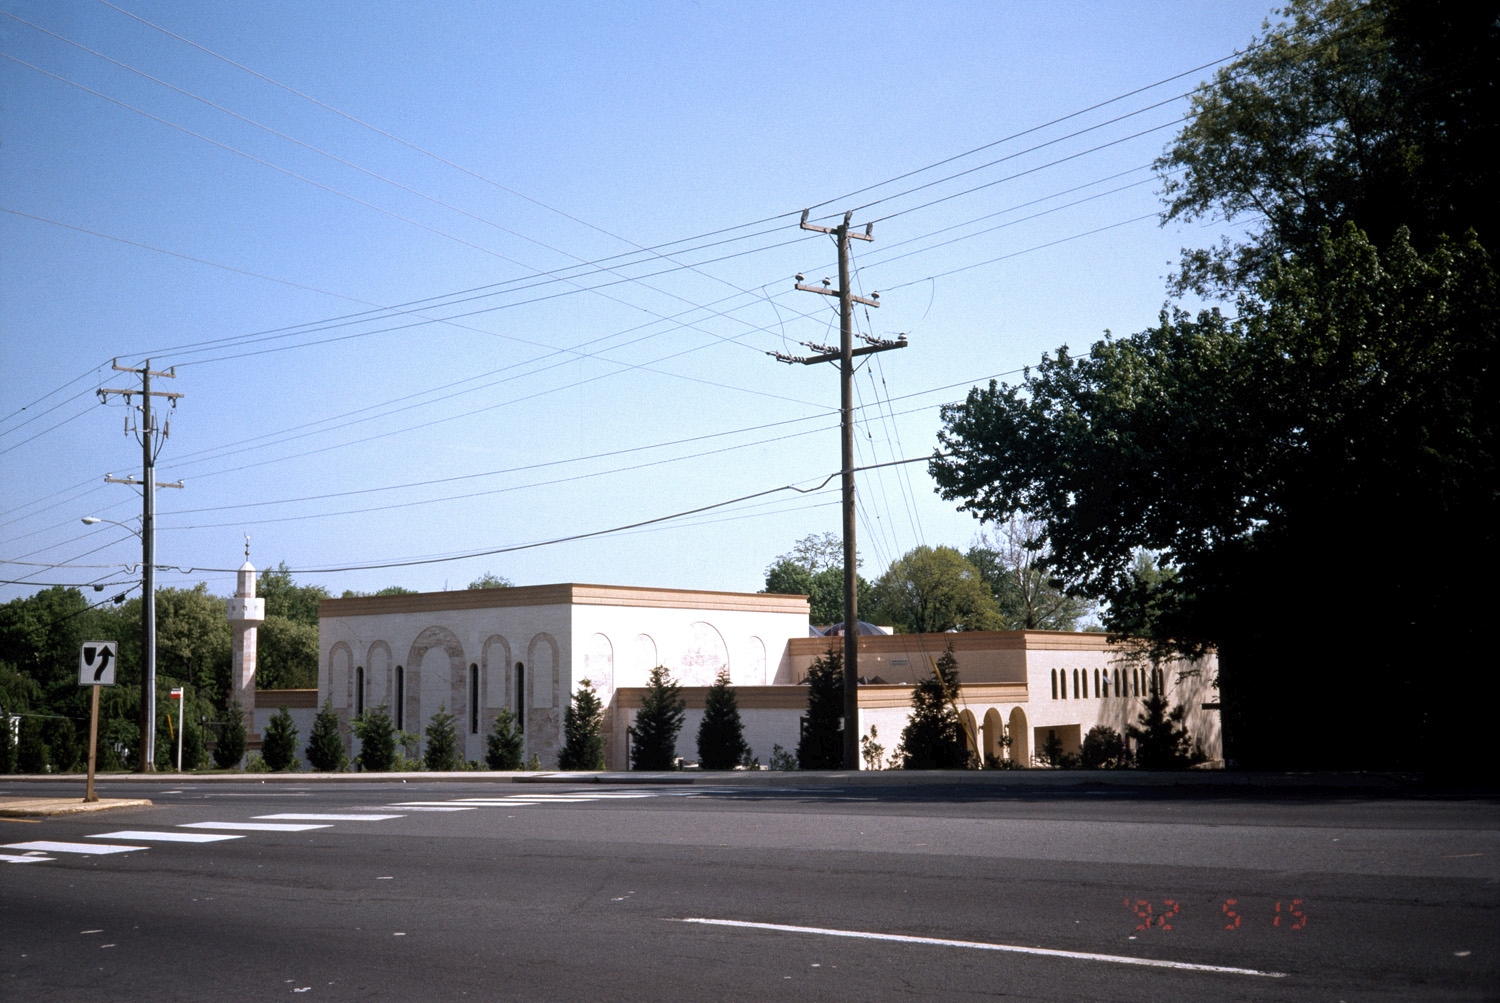 Dar Al-Hijrah Islamic Center - Distant exterior view from the south